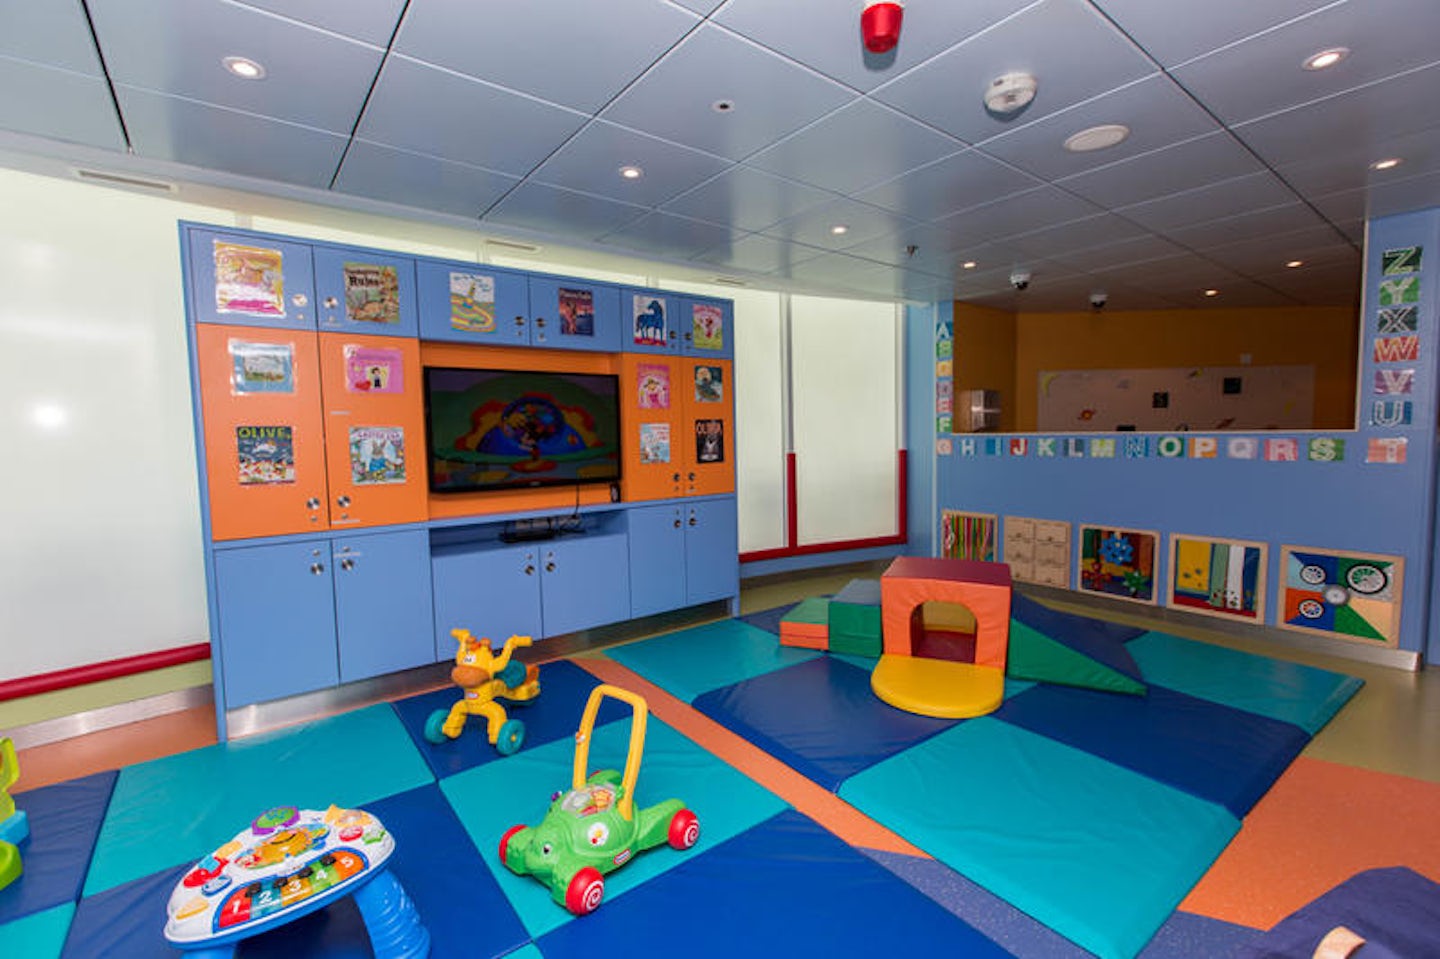 Royal Babies and Tots Nursery on Vision of the Seas